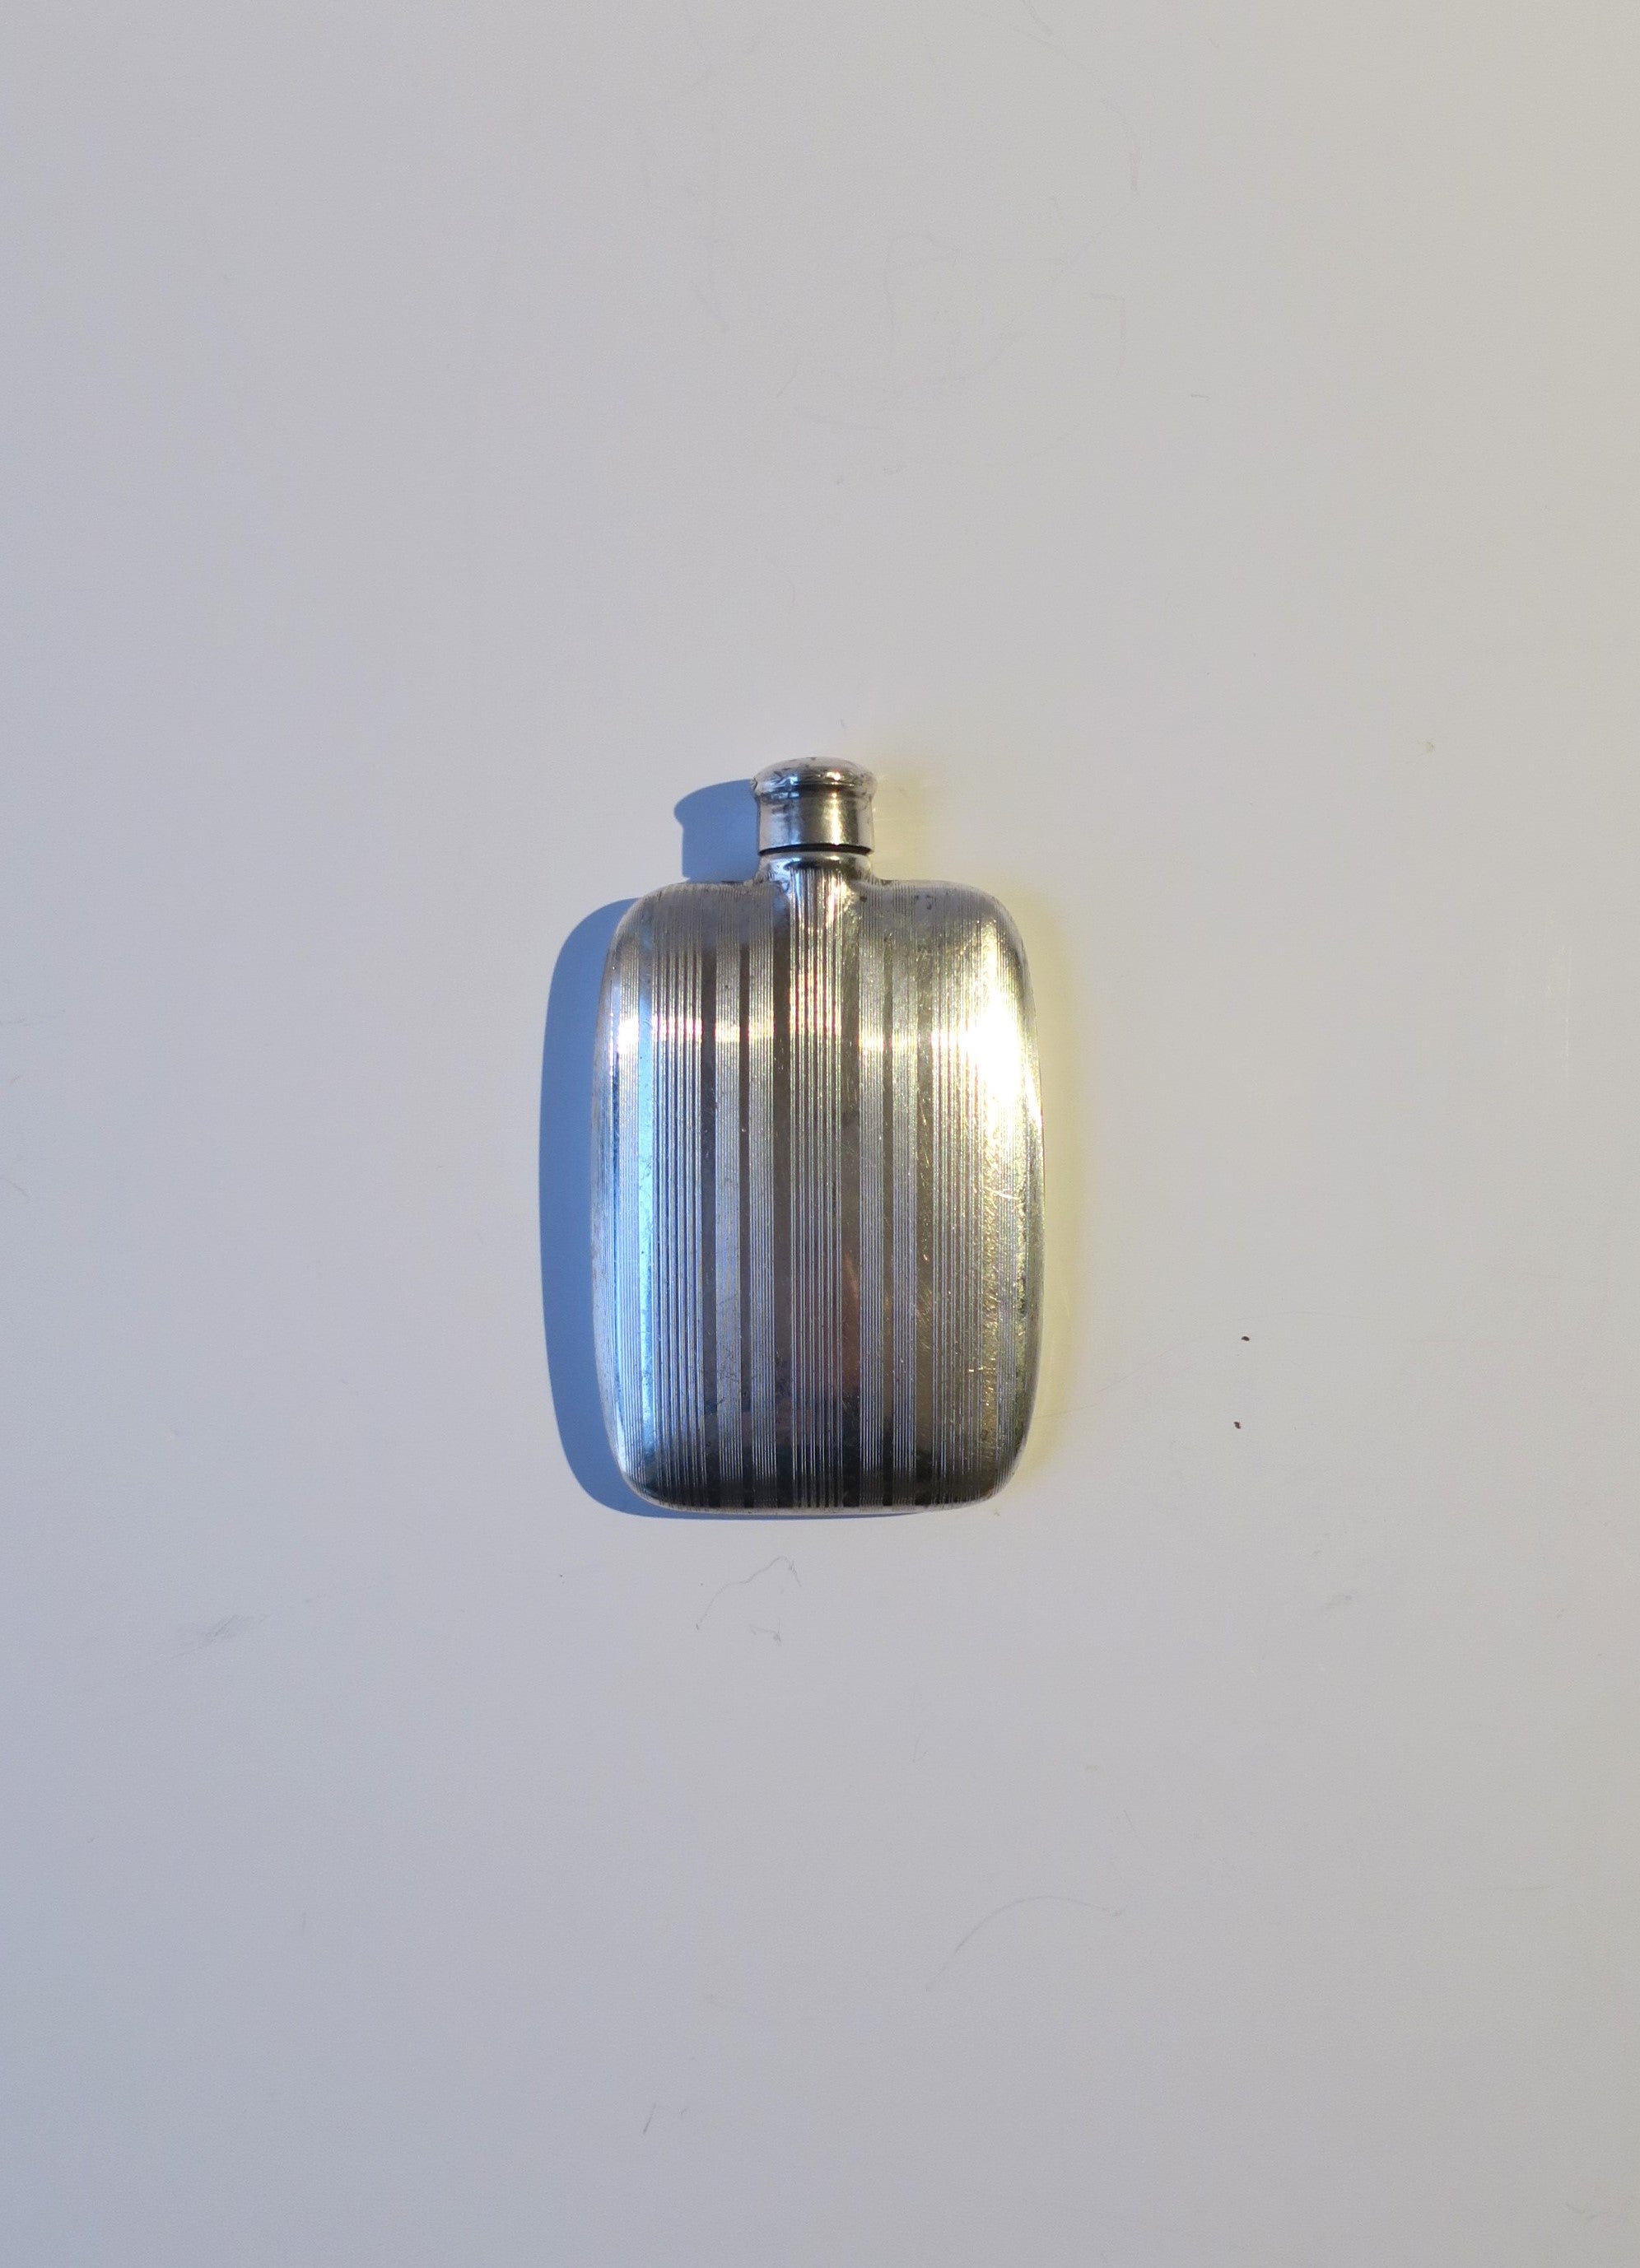 A beautiful small sterling silver hip or pocket flask, Art Deco period, made by Napier Co., circa early-20th century, Massachusetts, USA. Flask has engraved stripes down front and plain back (where an engraving or monogram may be added if so desired